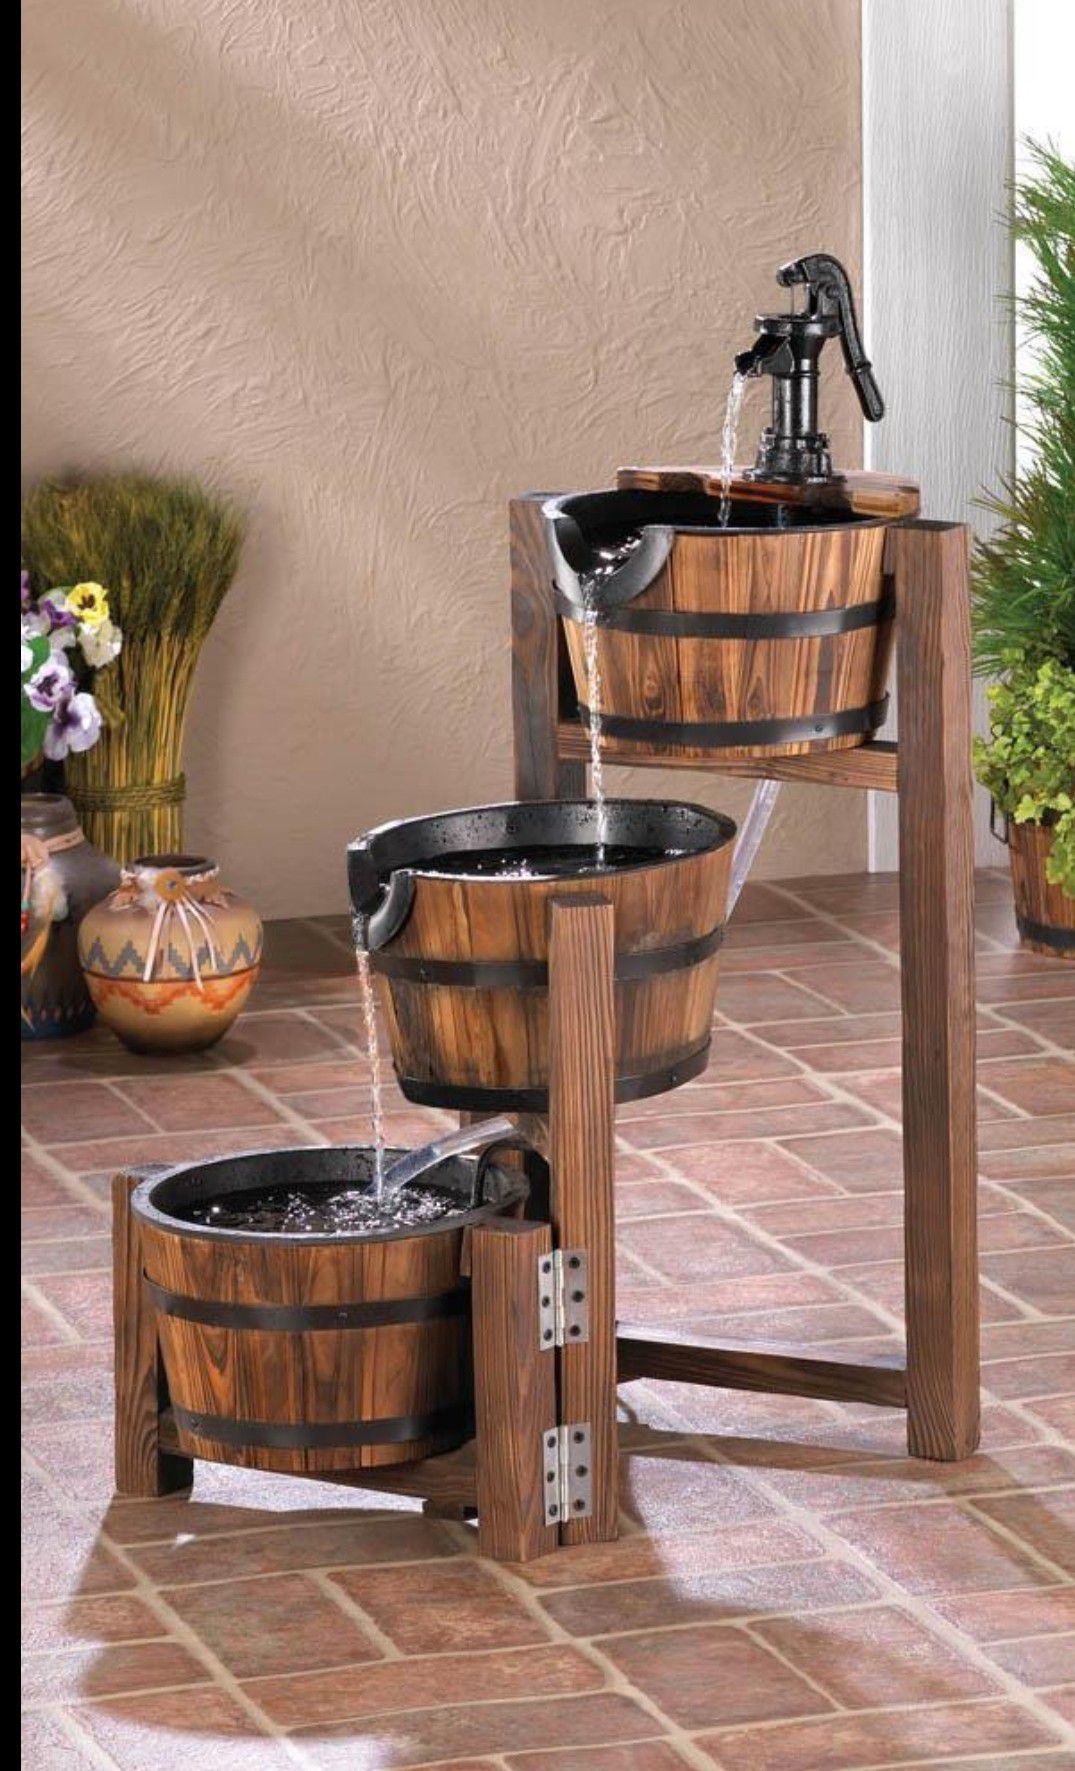 Outdoors Water Falls Country Motive Wooden Baskets